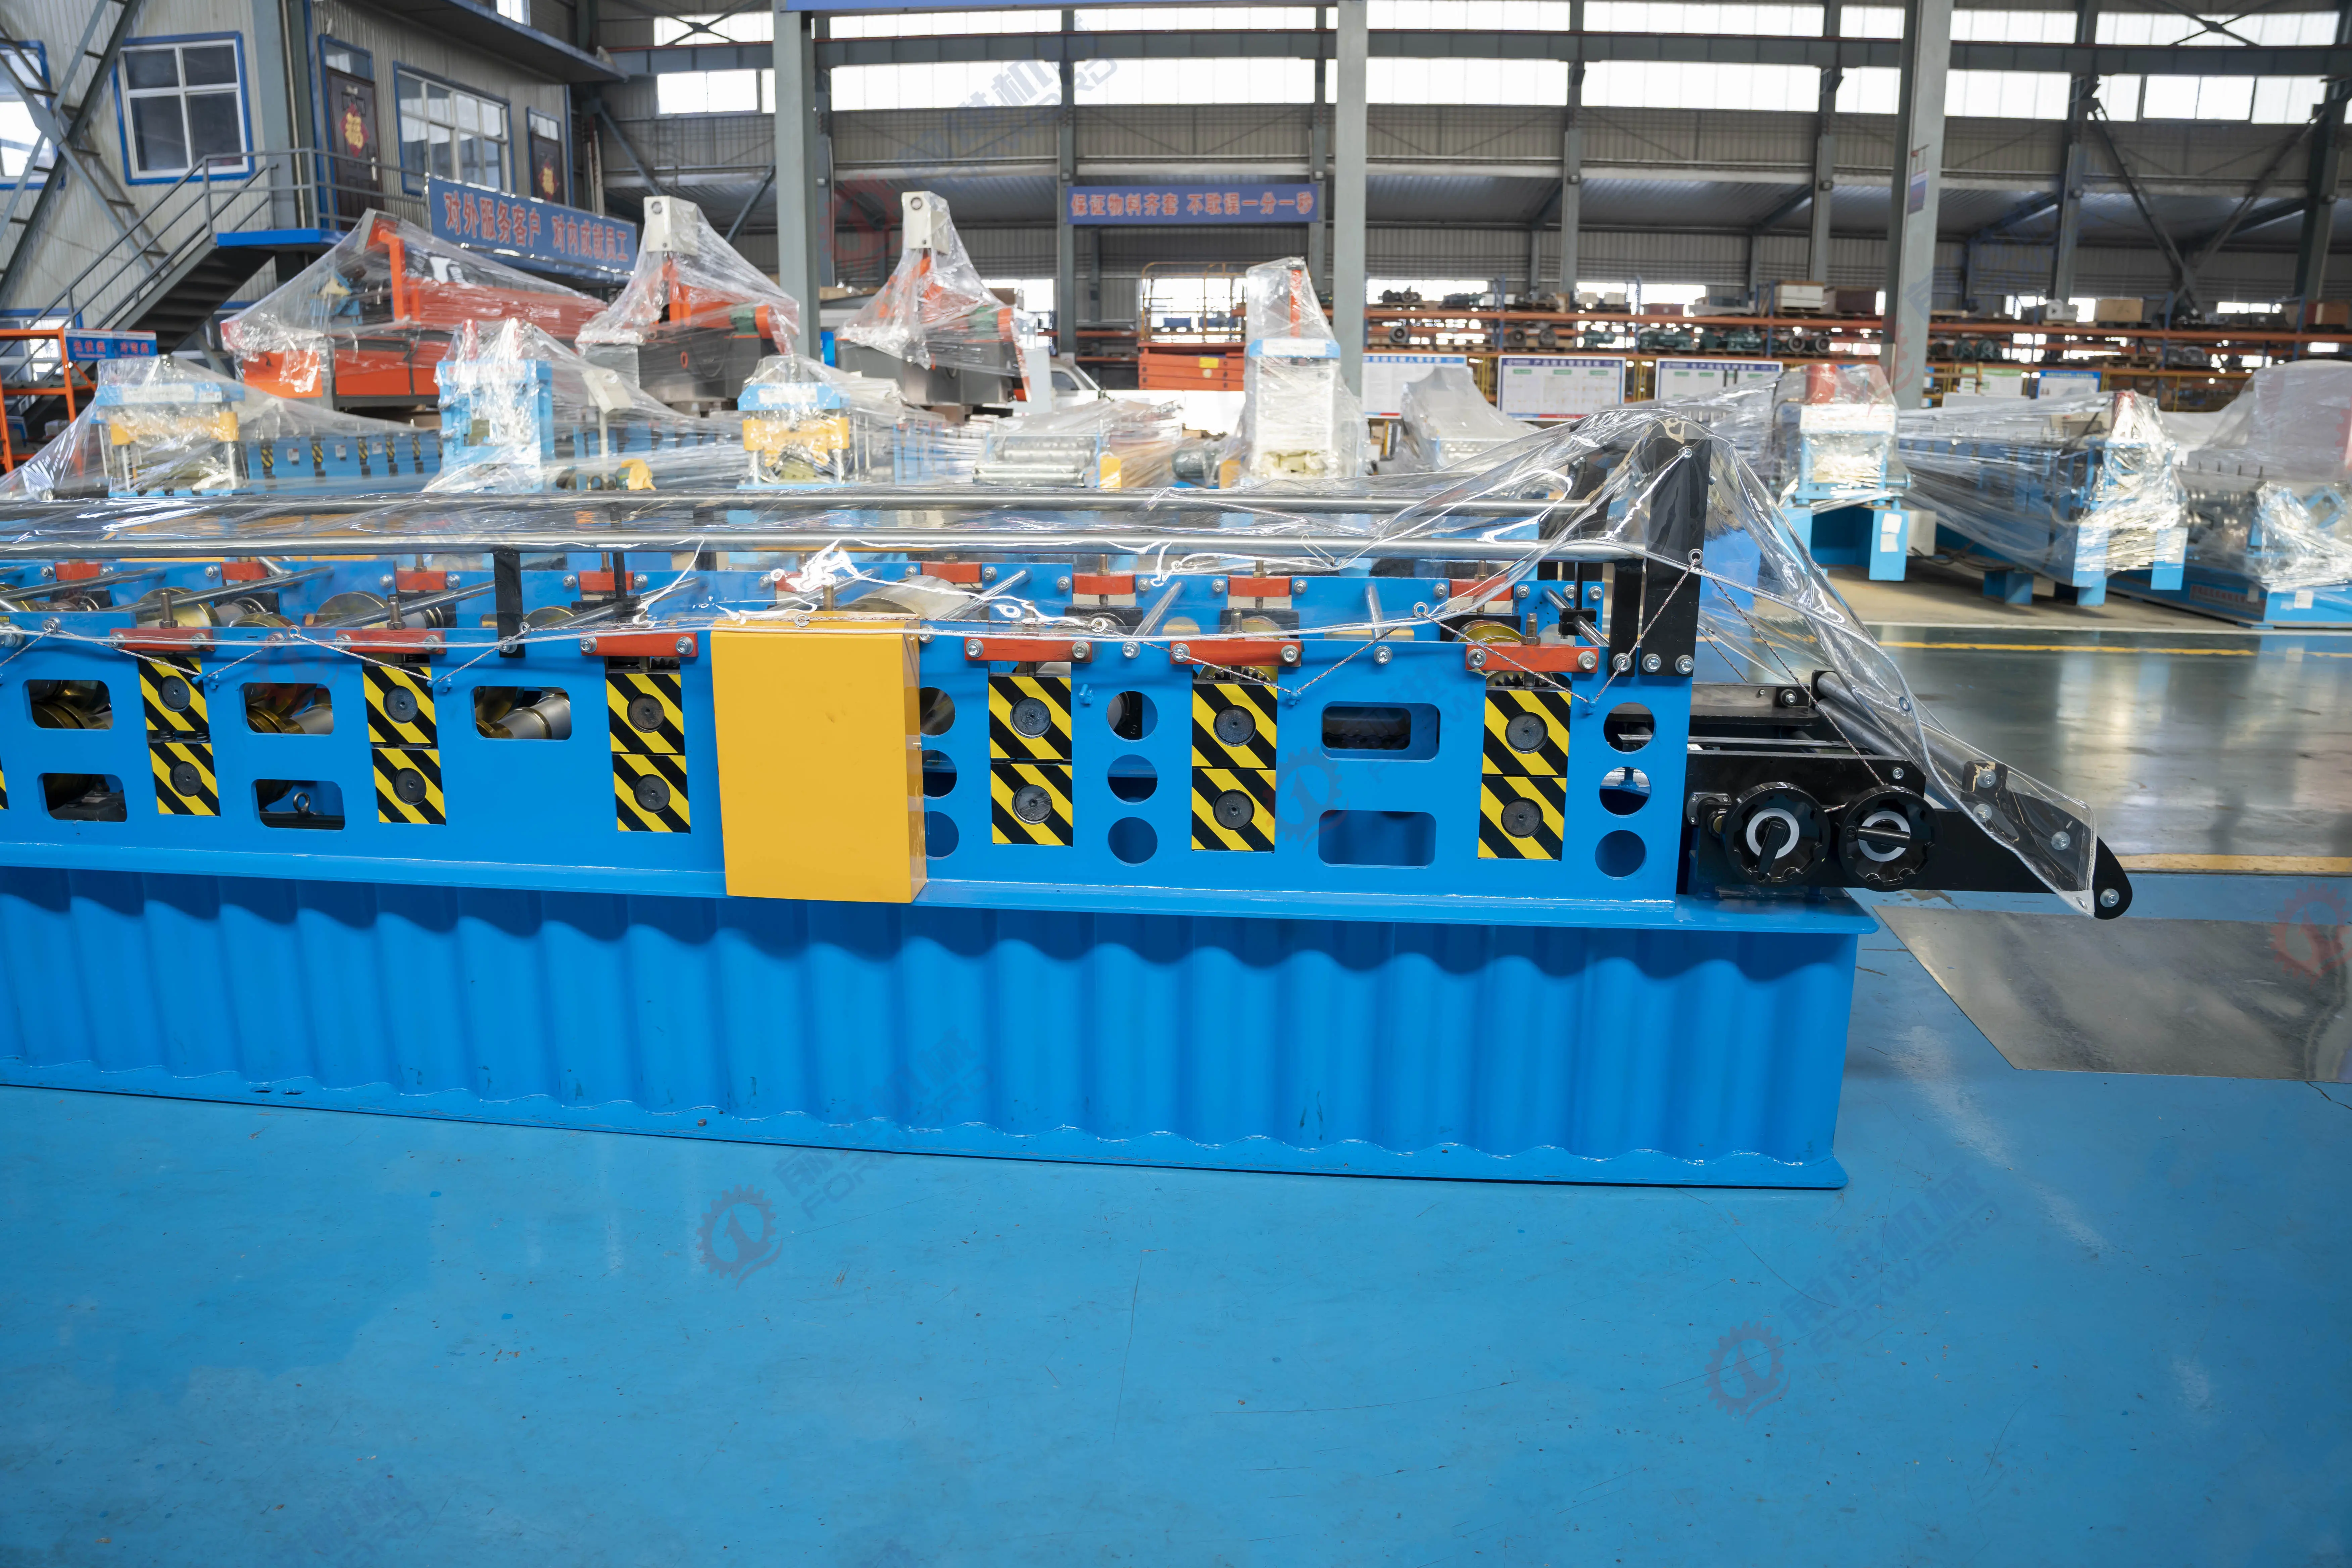 FORWARD Standing Seam Roll Forming Machines Meeting the Demands of the Roofing Industry